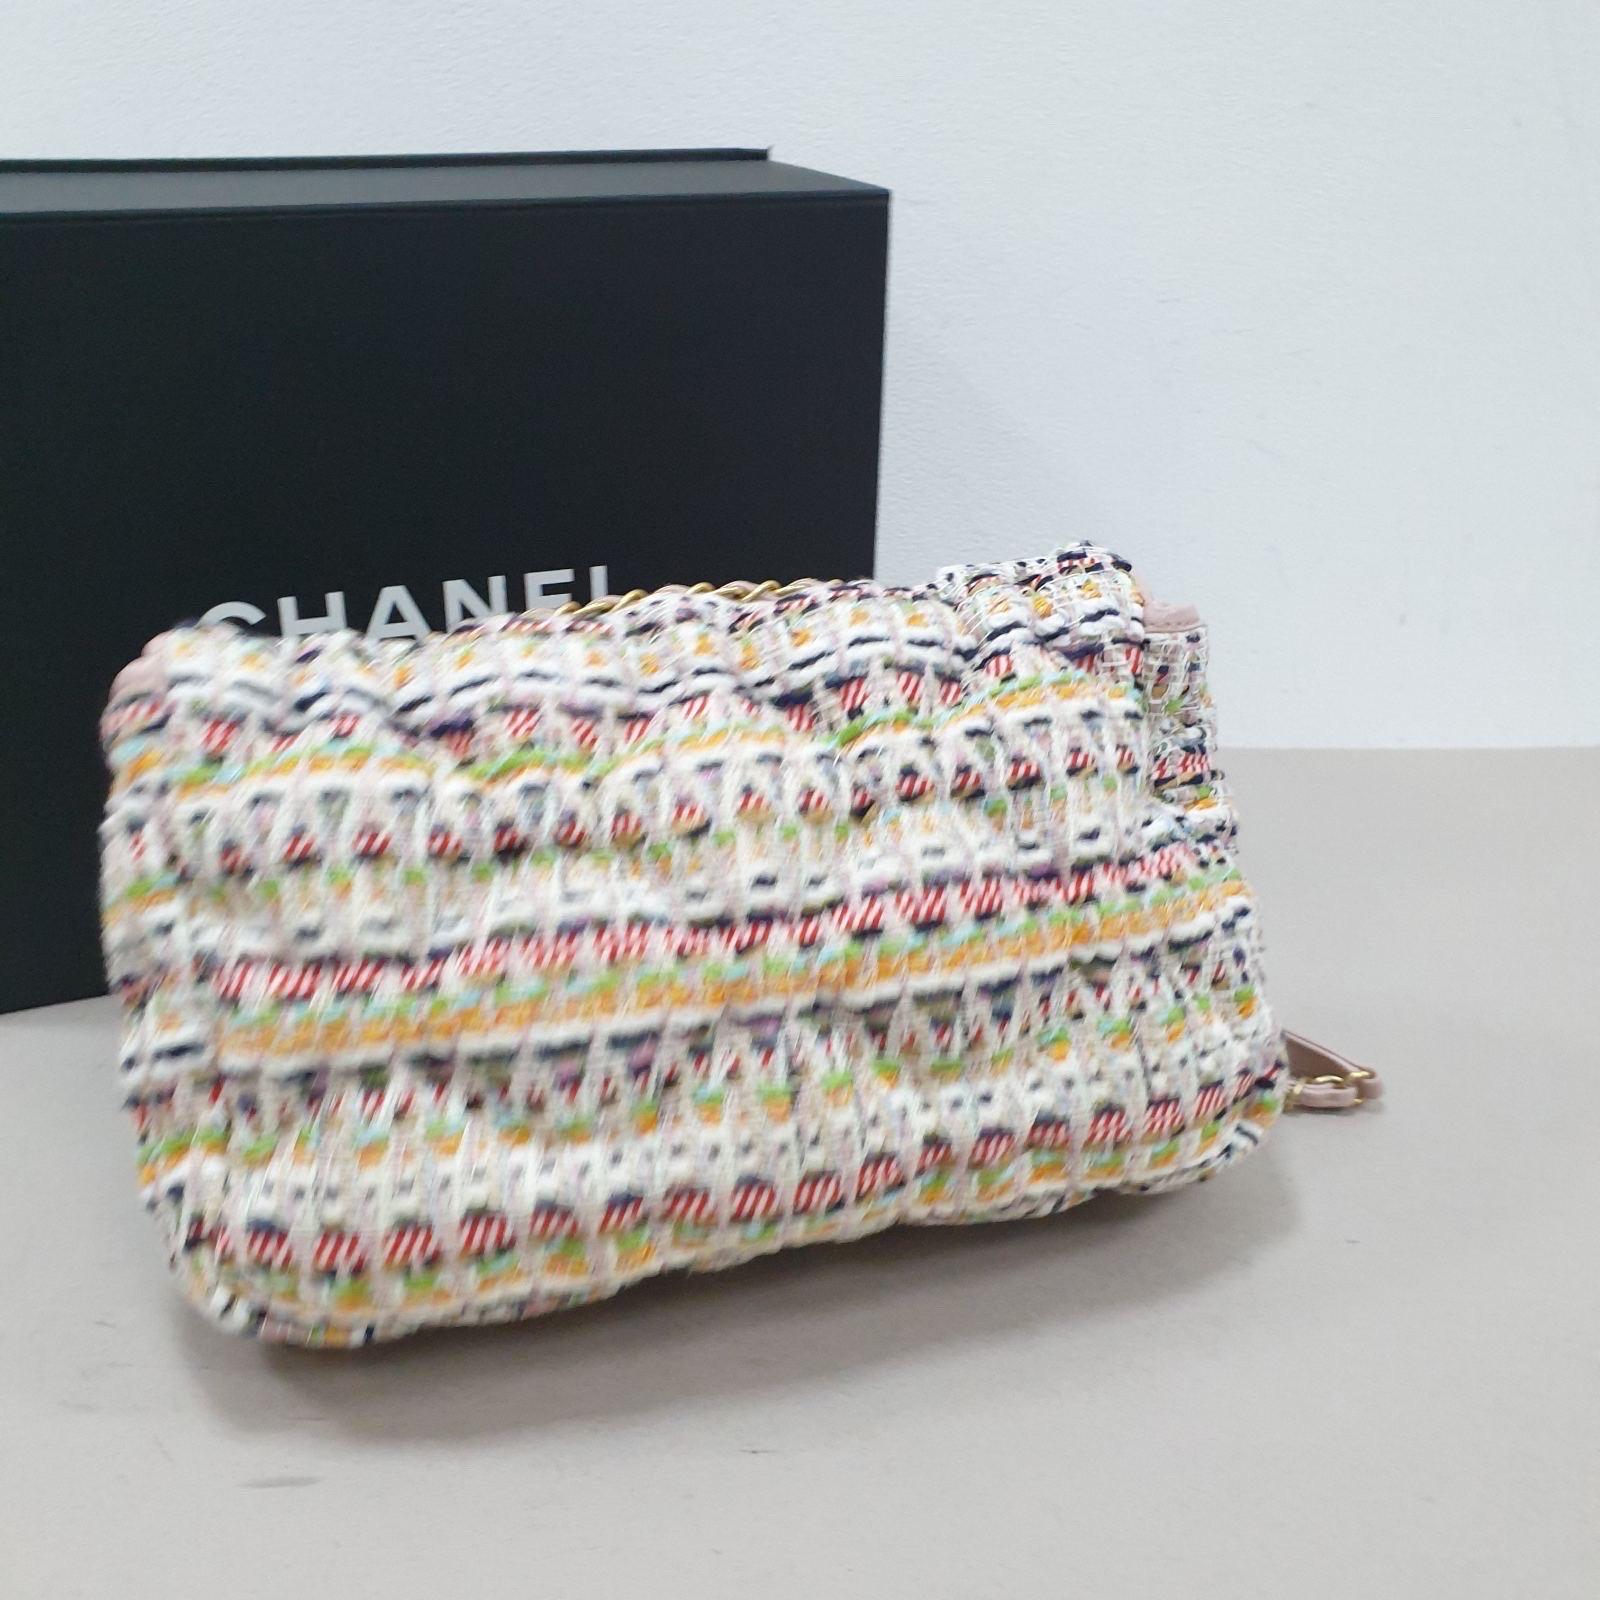 Chanel Coco Cuba Flap Quilted Tweed Bag 2